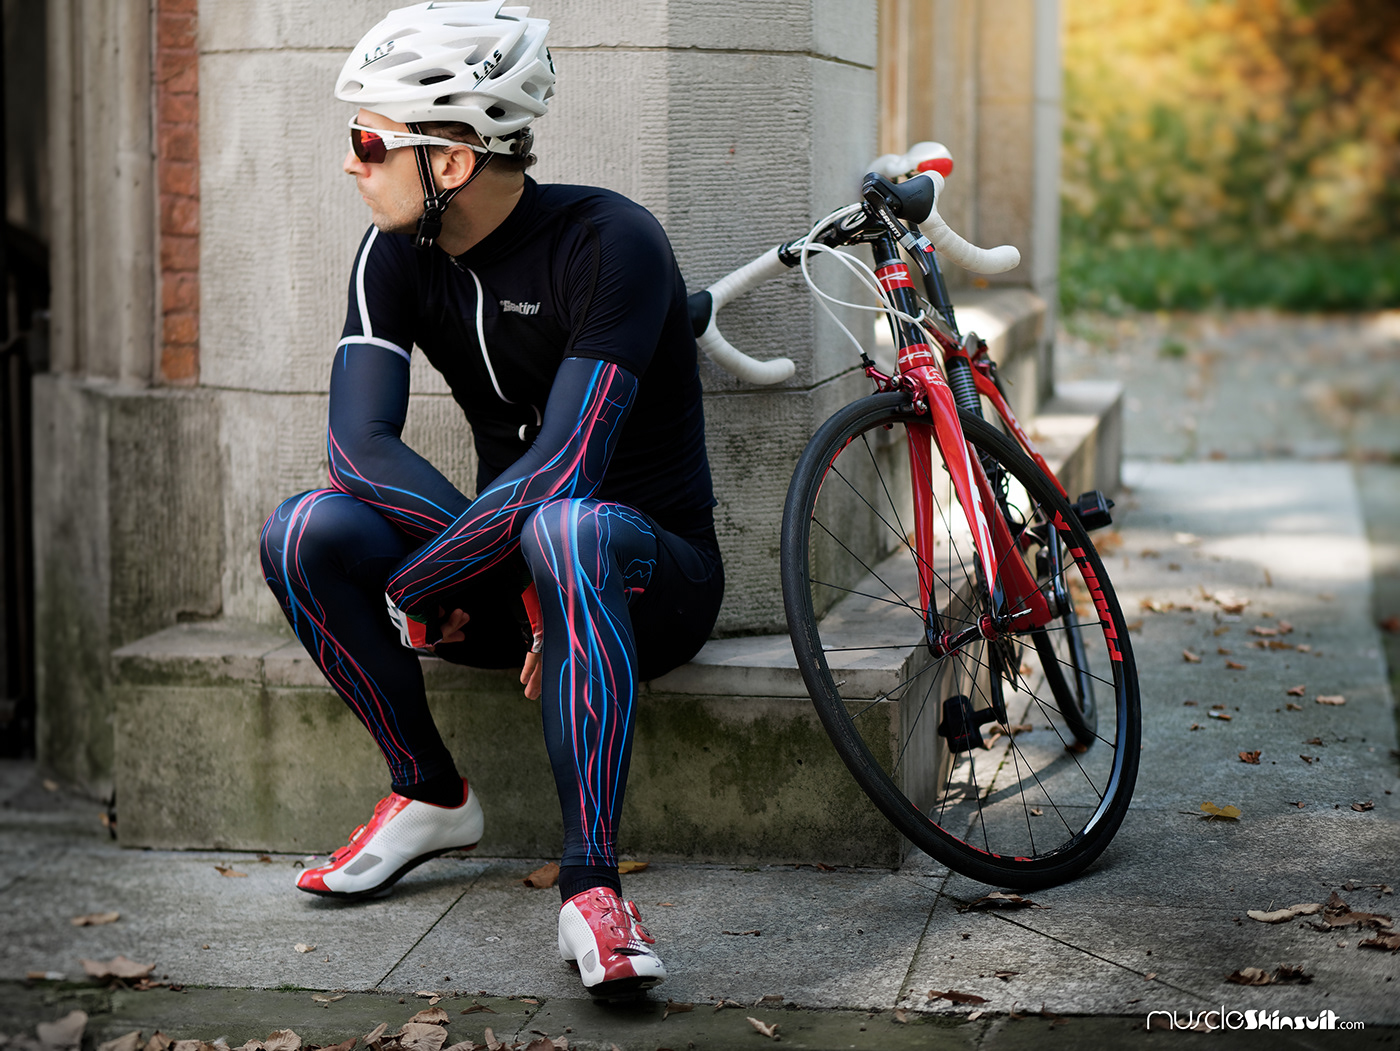 Cardiovascular system legwarmers for cyclist
and anatomy lovers